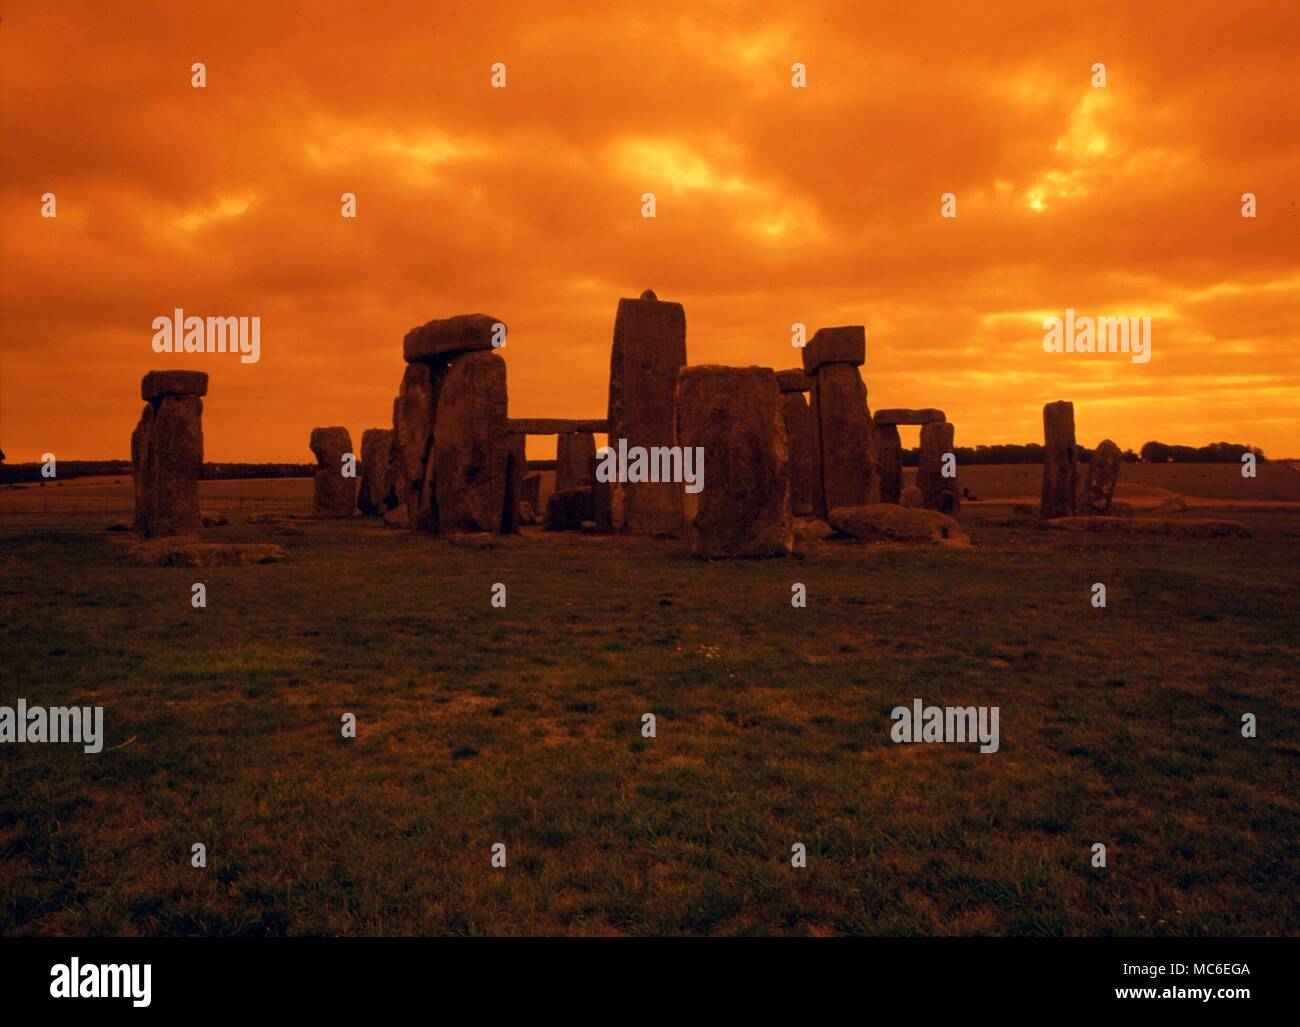 STONES - Stonehenge, the prehistoric religious complex, commenced 2,200 BC within an earthwork about 380 feet in diameter. Some of the sarsens weigh 30 tons each - the outer range with lintels has a diameter of about 100 feet Stock Photo